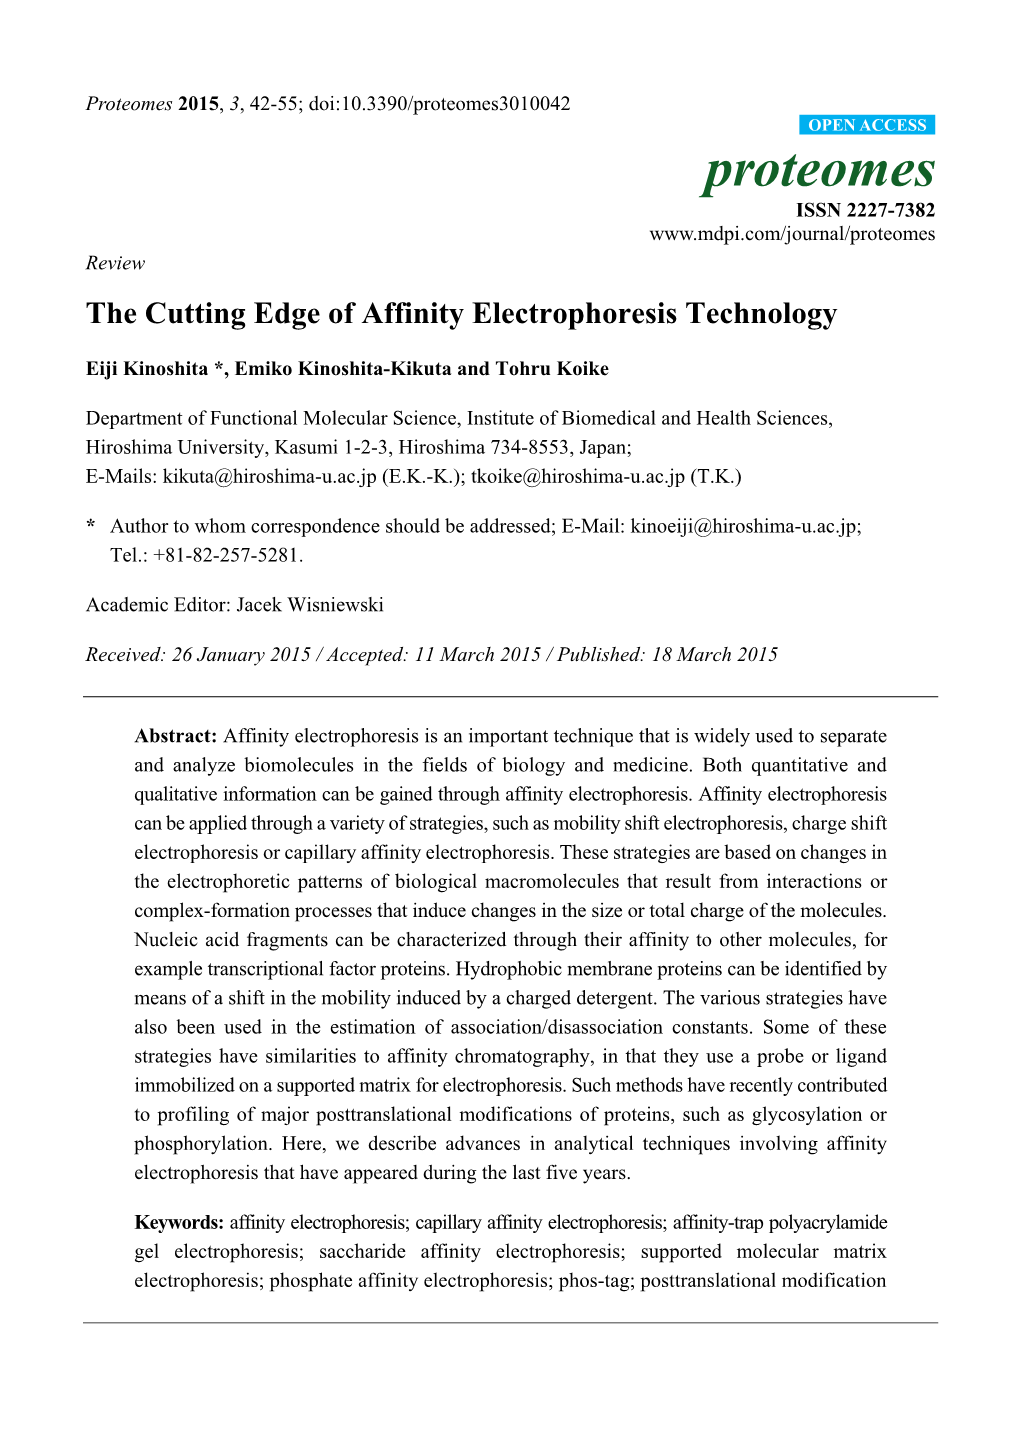 The Cutting Edge of Affinity Electrophoresis Technology